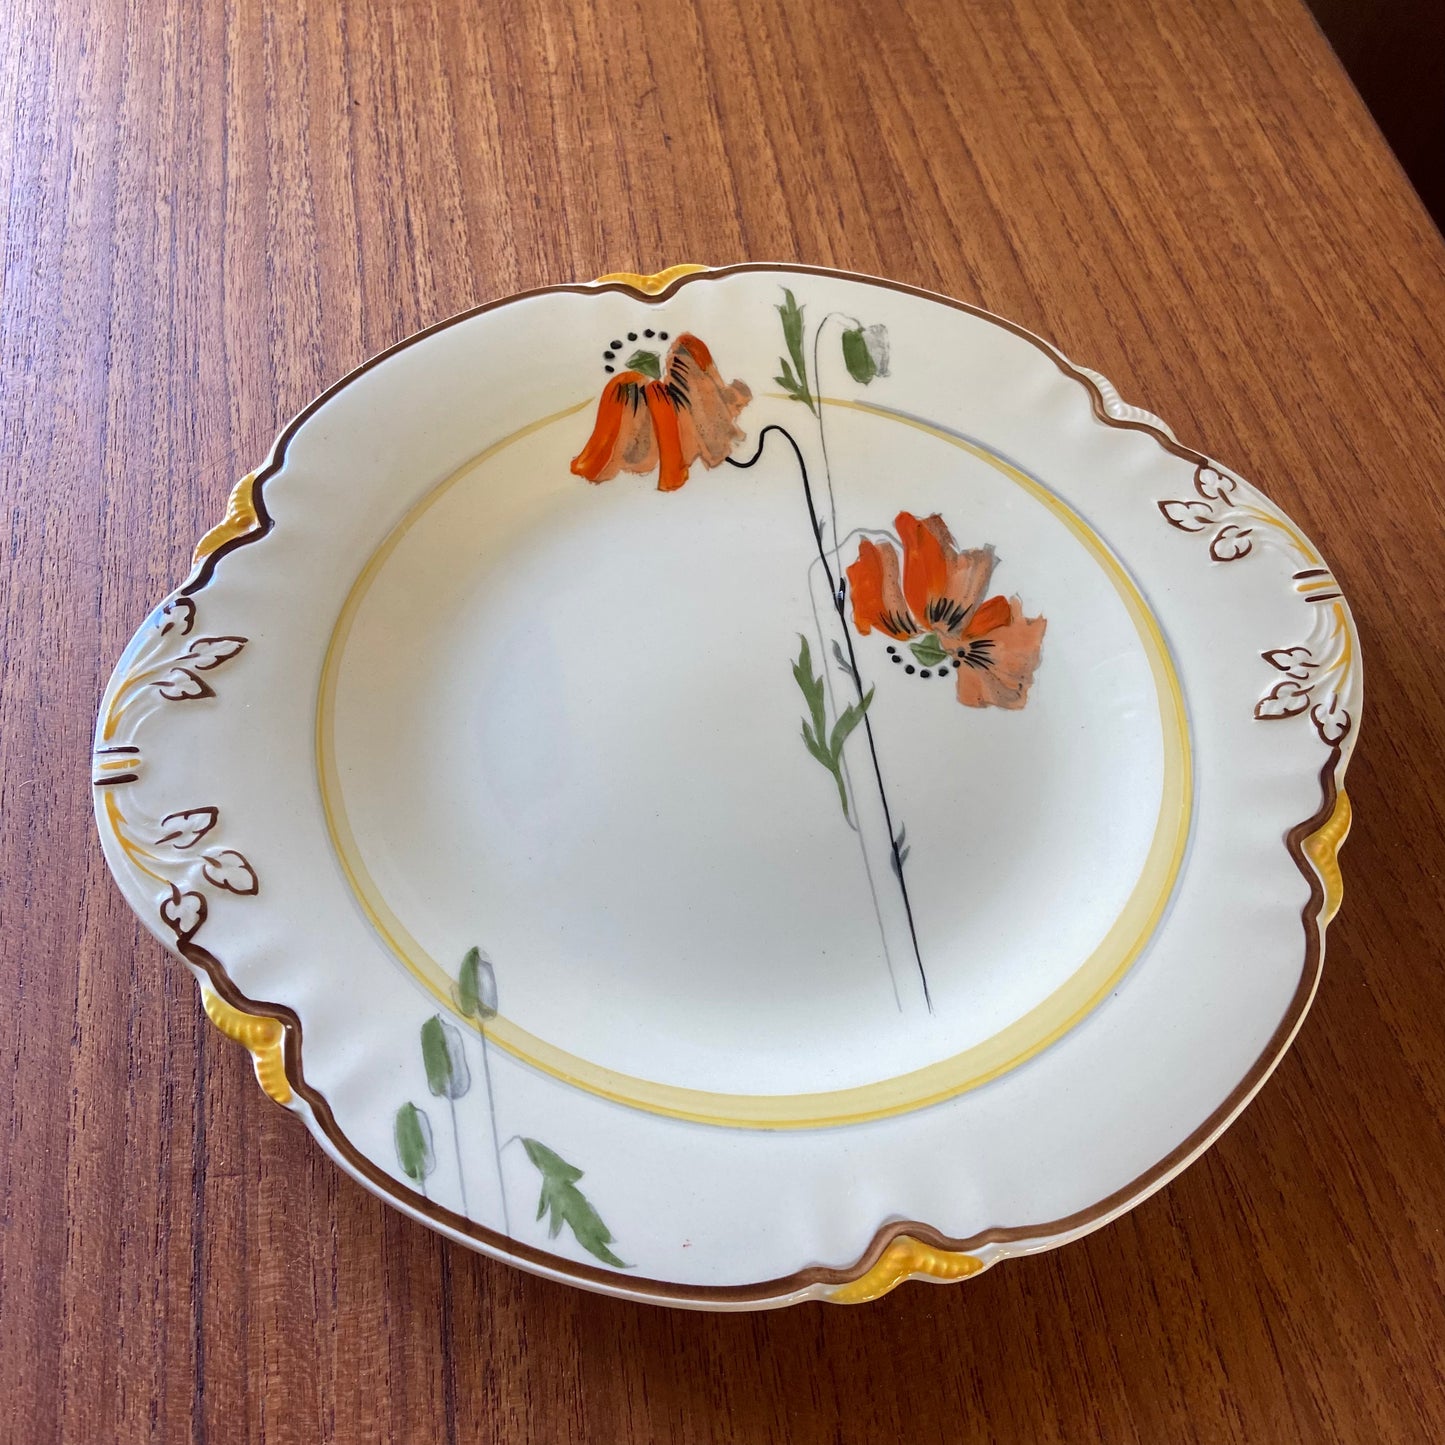 Woods Ivory Ware "Cremone" Side Plate